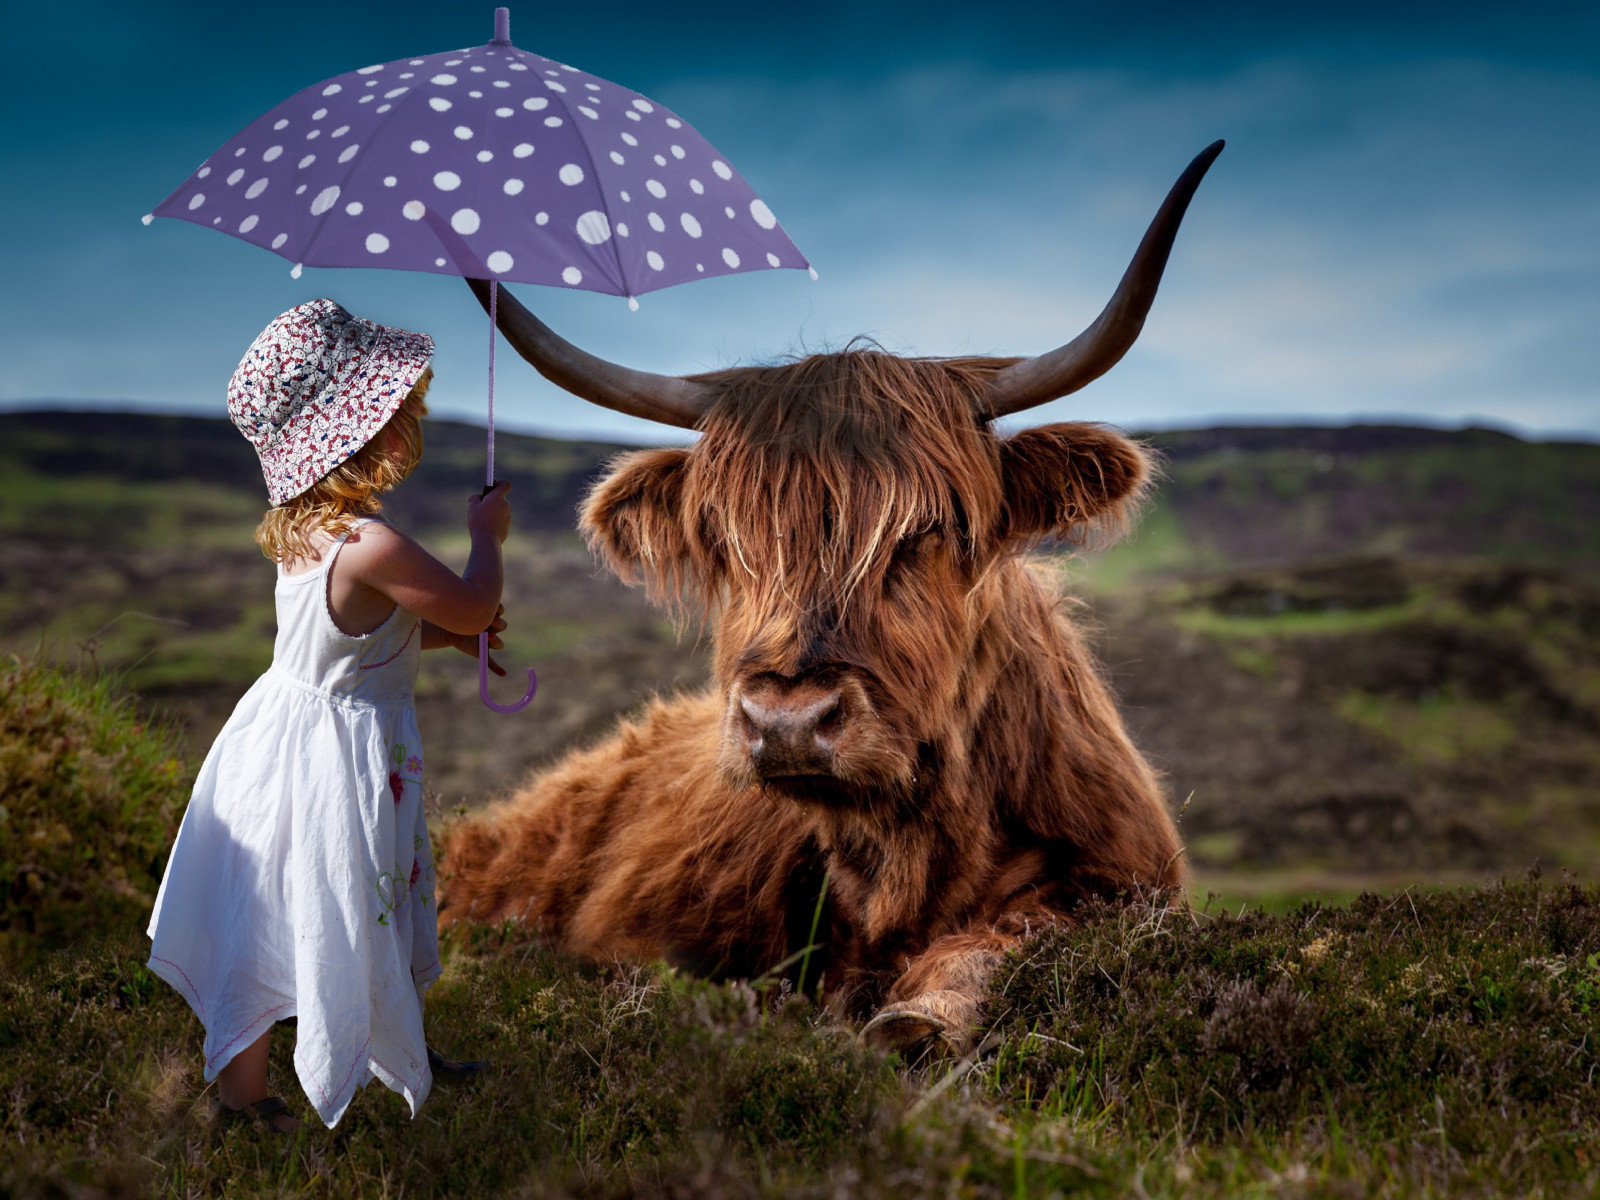 Child with the umbrella and the funny cow wallpaper 1600x1200